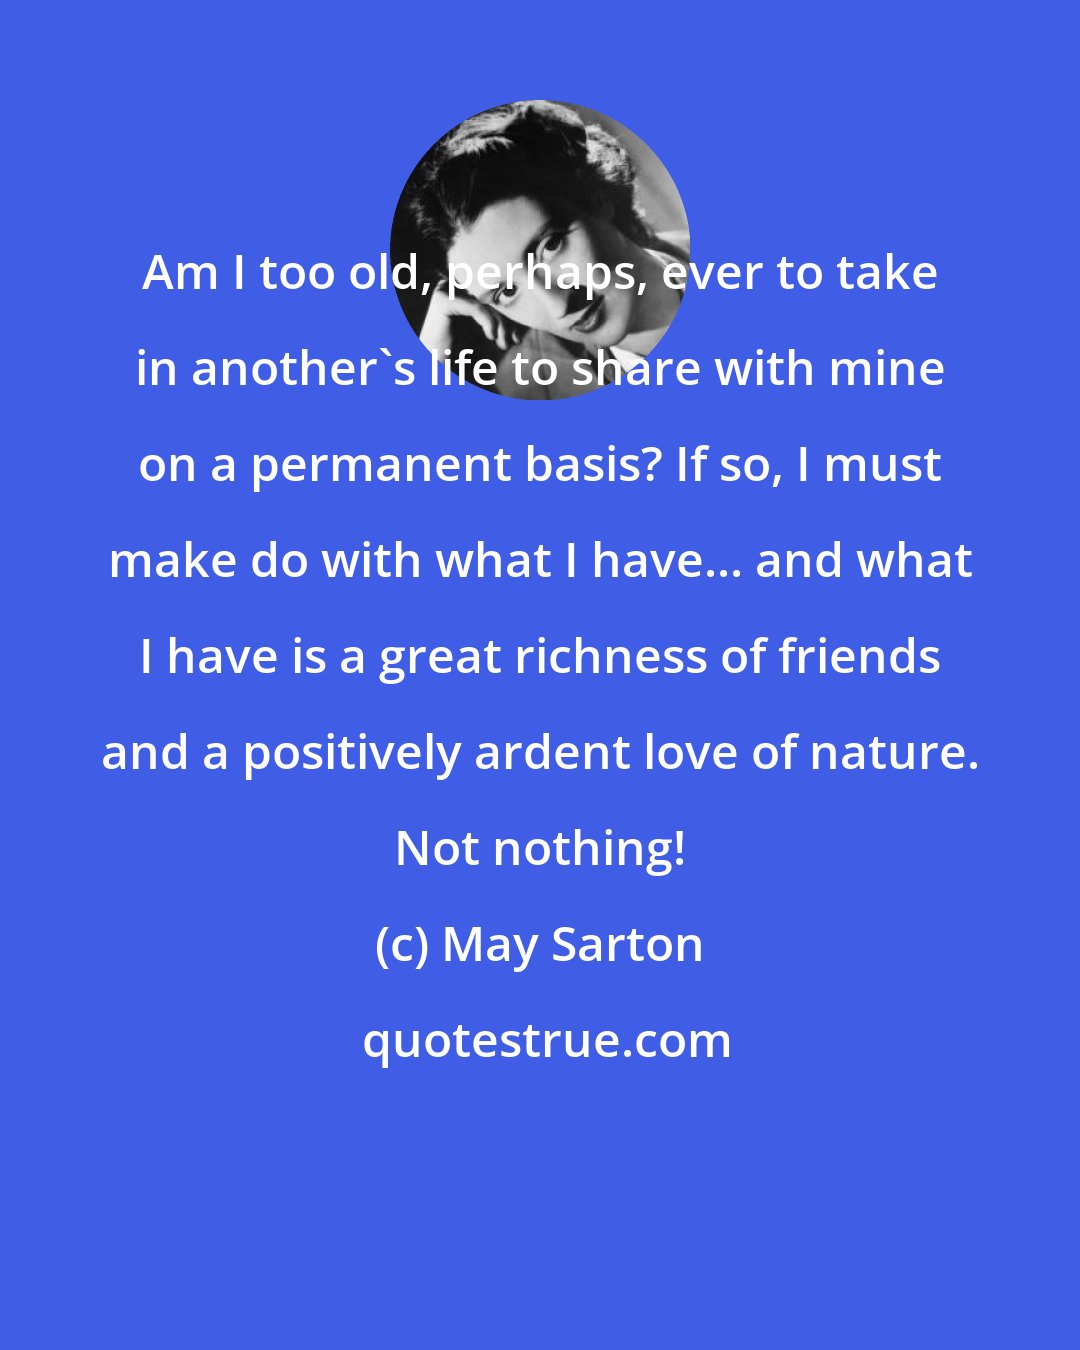 May Sarton: Am I too old, perhaps, ever to take in another's life to share with mine on a permanent basis? If so, I must make do with what I have... and what I have is a great richness of friends and a positively ardent love of nature. Not nothing!